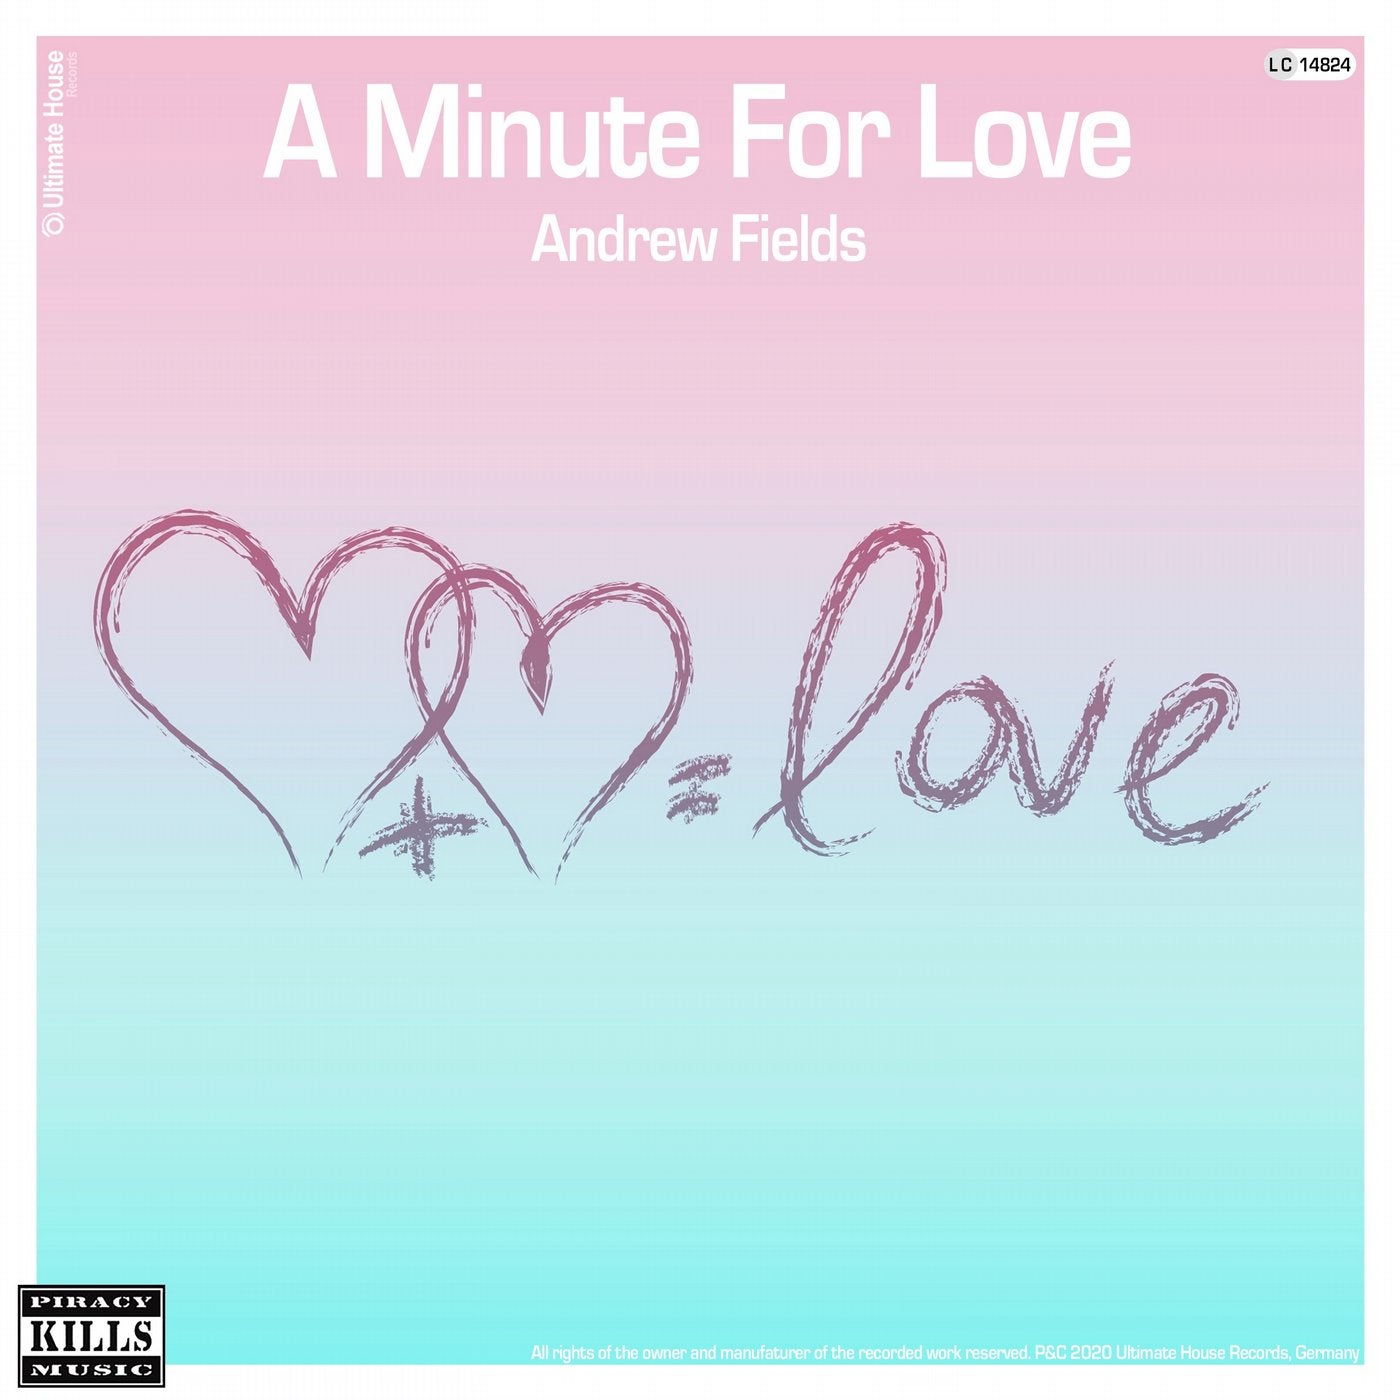 A Minute for Love